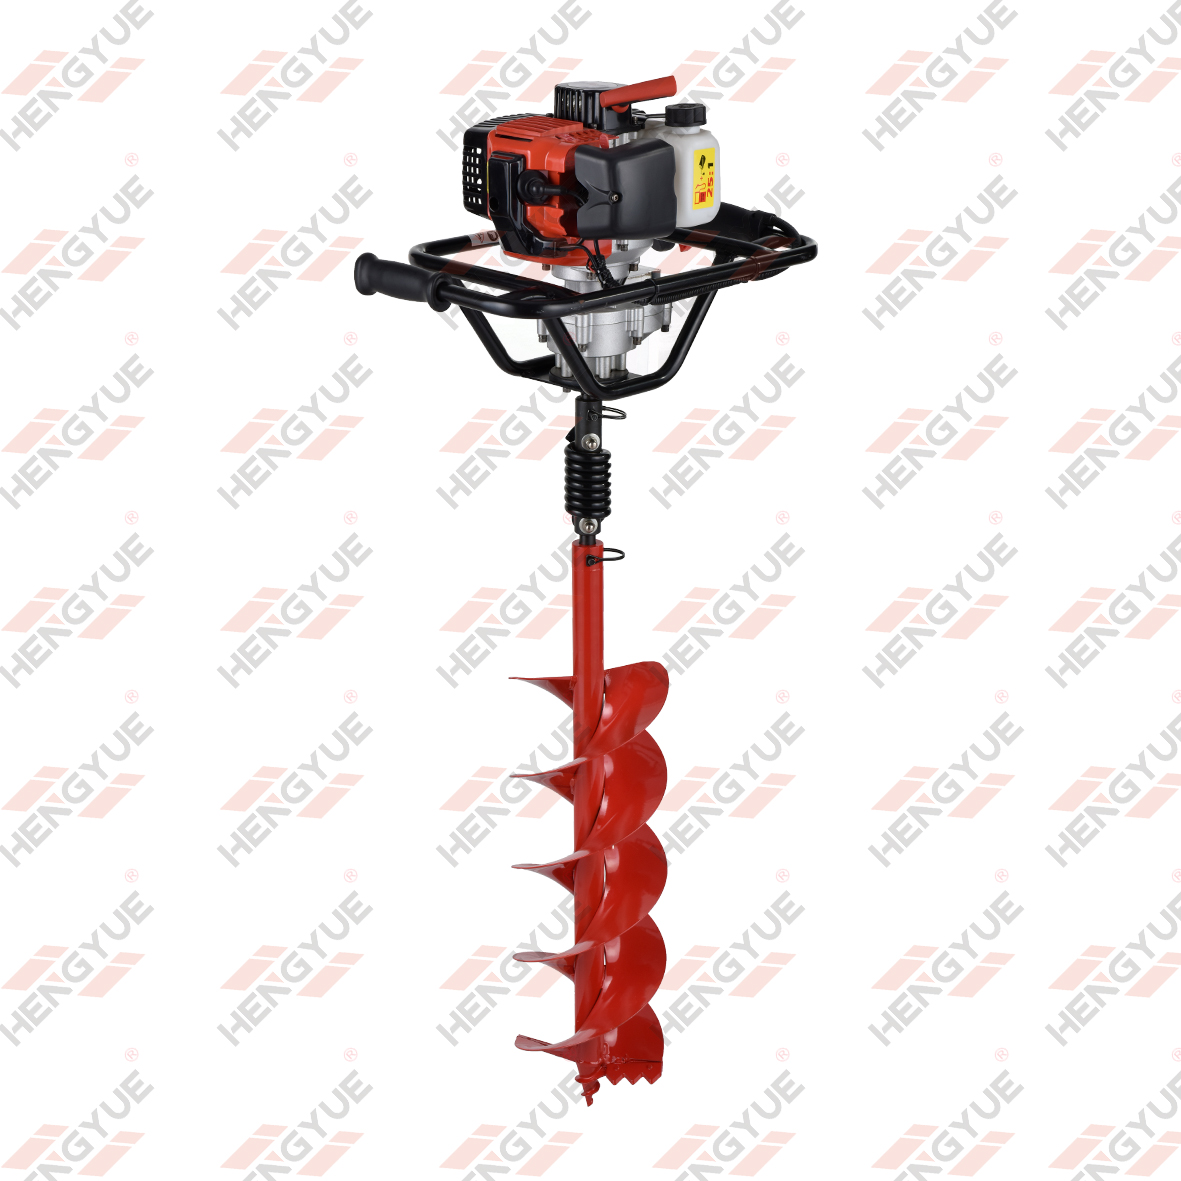 43cc Engine Power Earth Auger 